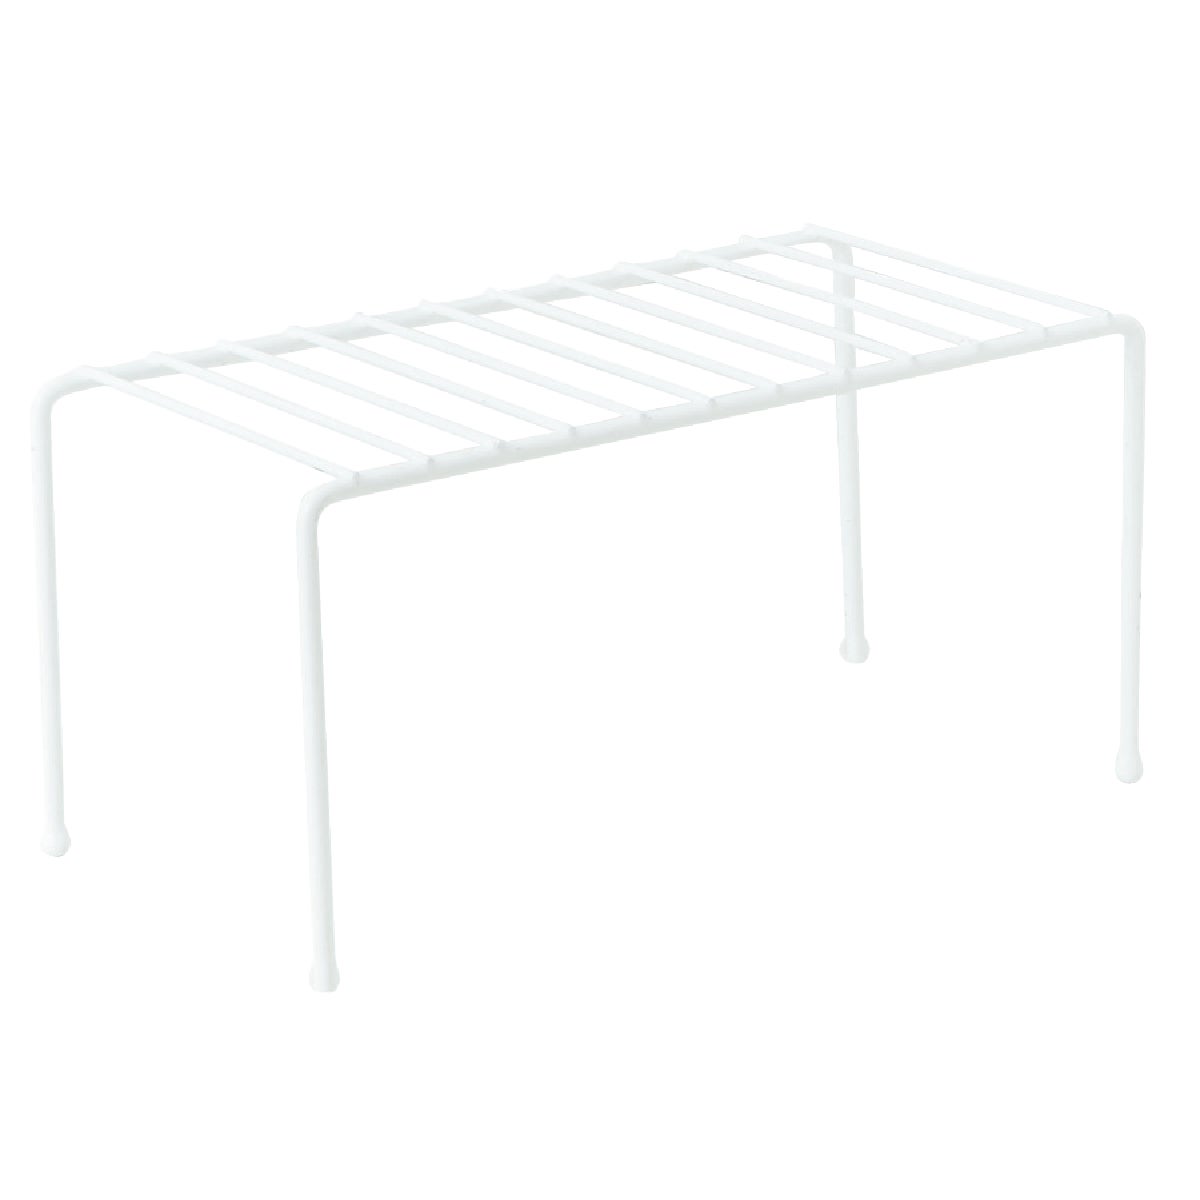 Item 610182, Sturdy wire with white vinyl coating. Adds extra space.